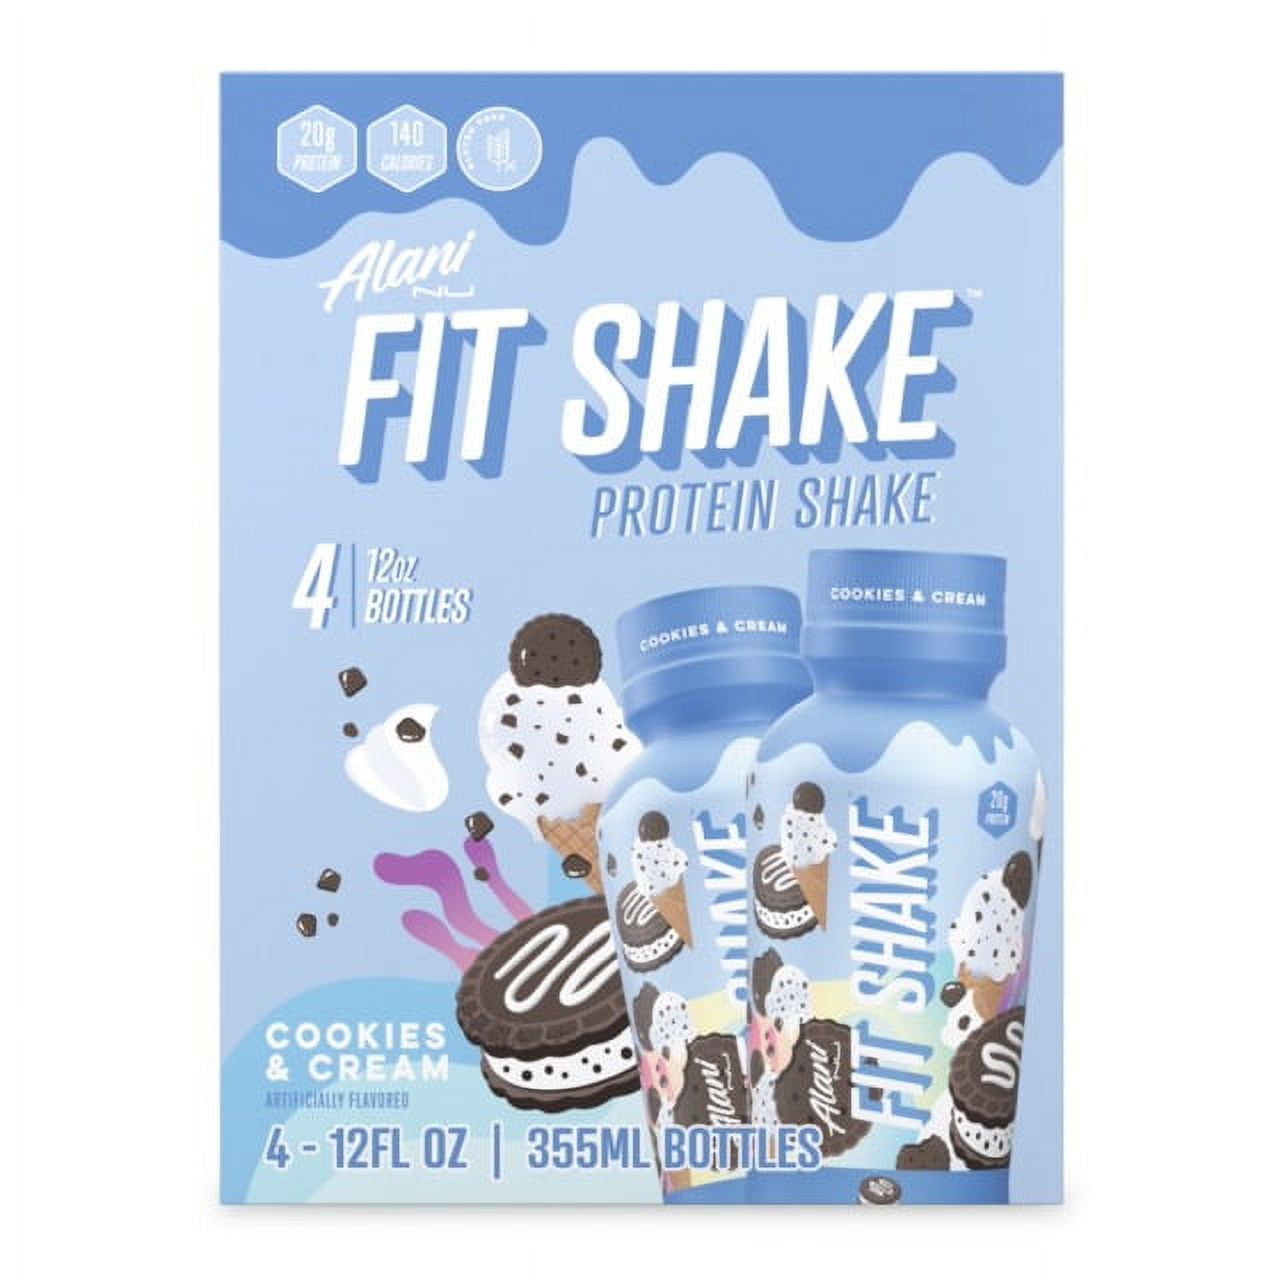 Alani Nu Protein Shake Ready to Drink Naturally Flavored Gluten Free Only  140 Calories with 20g Protein per 12 Fl Oz bottle (Cookies & Cream 4 Pack)  Cookies & Cream 4 Pack